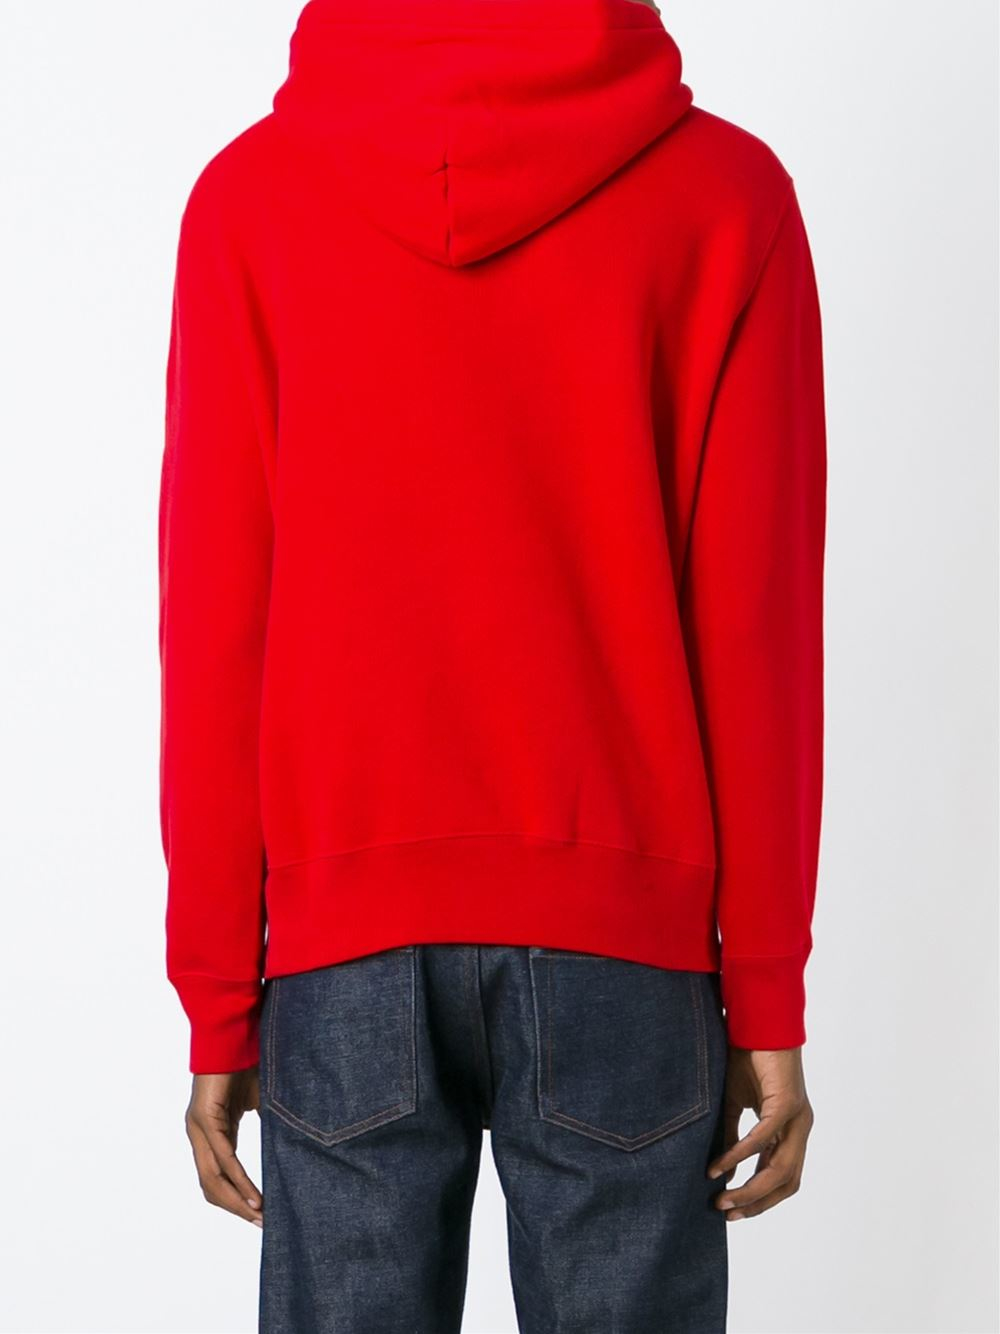 Lyst - Polo Ralph Lauren Logo Patch Hoodie in Red for Men